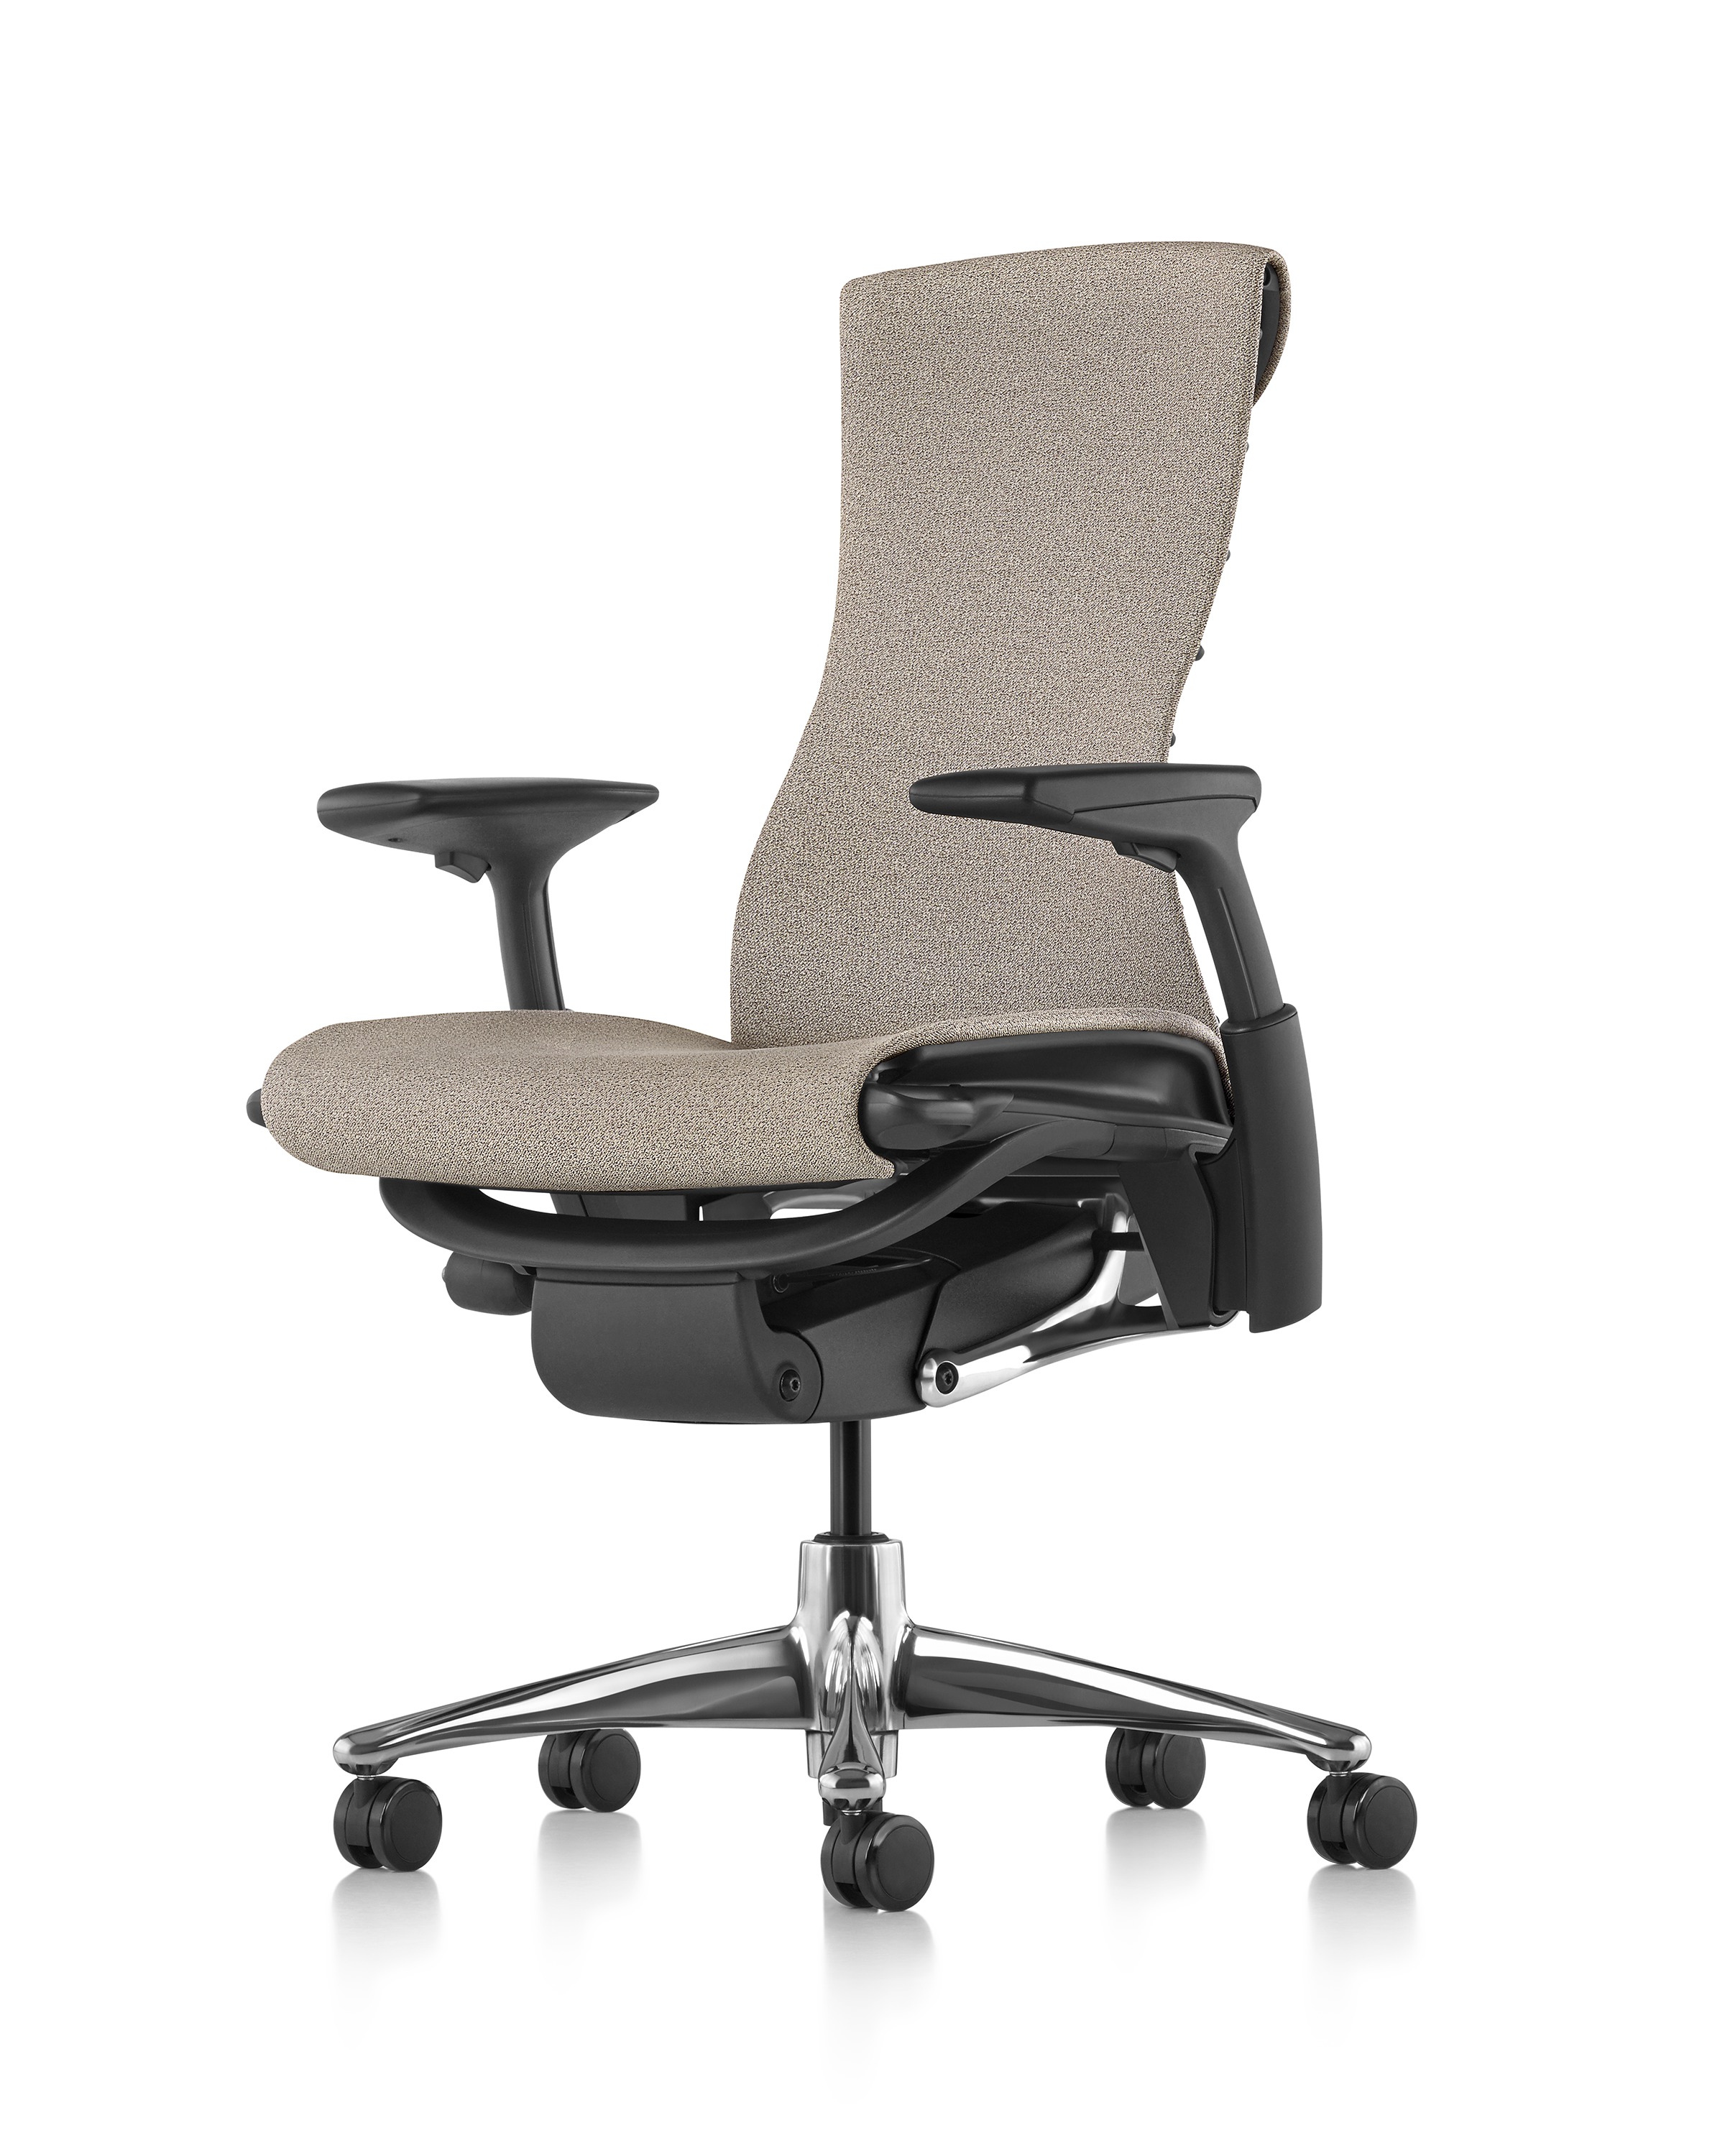 front view of beige embody chair